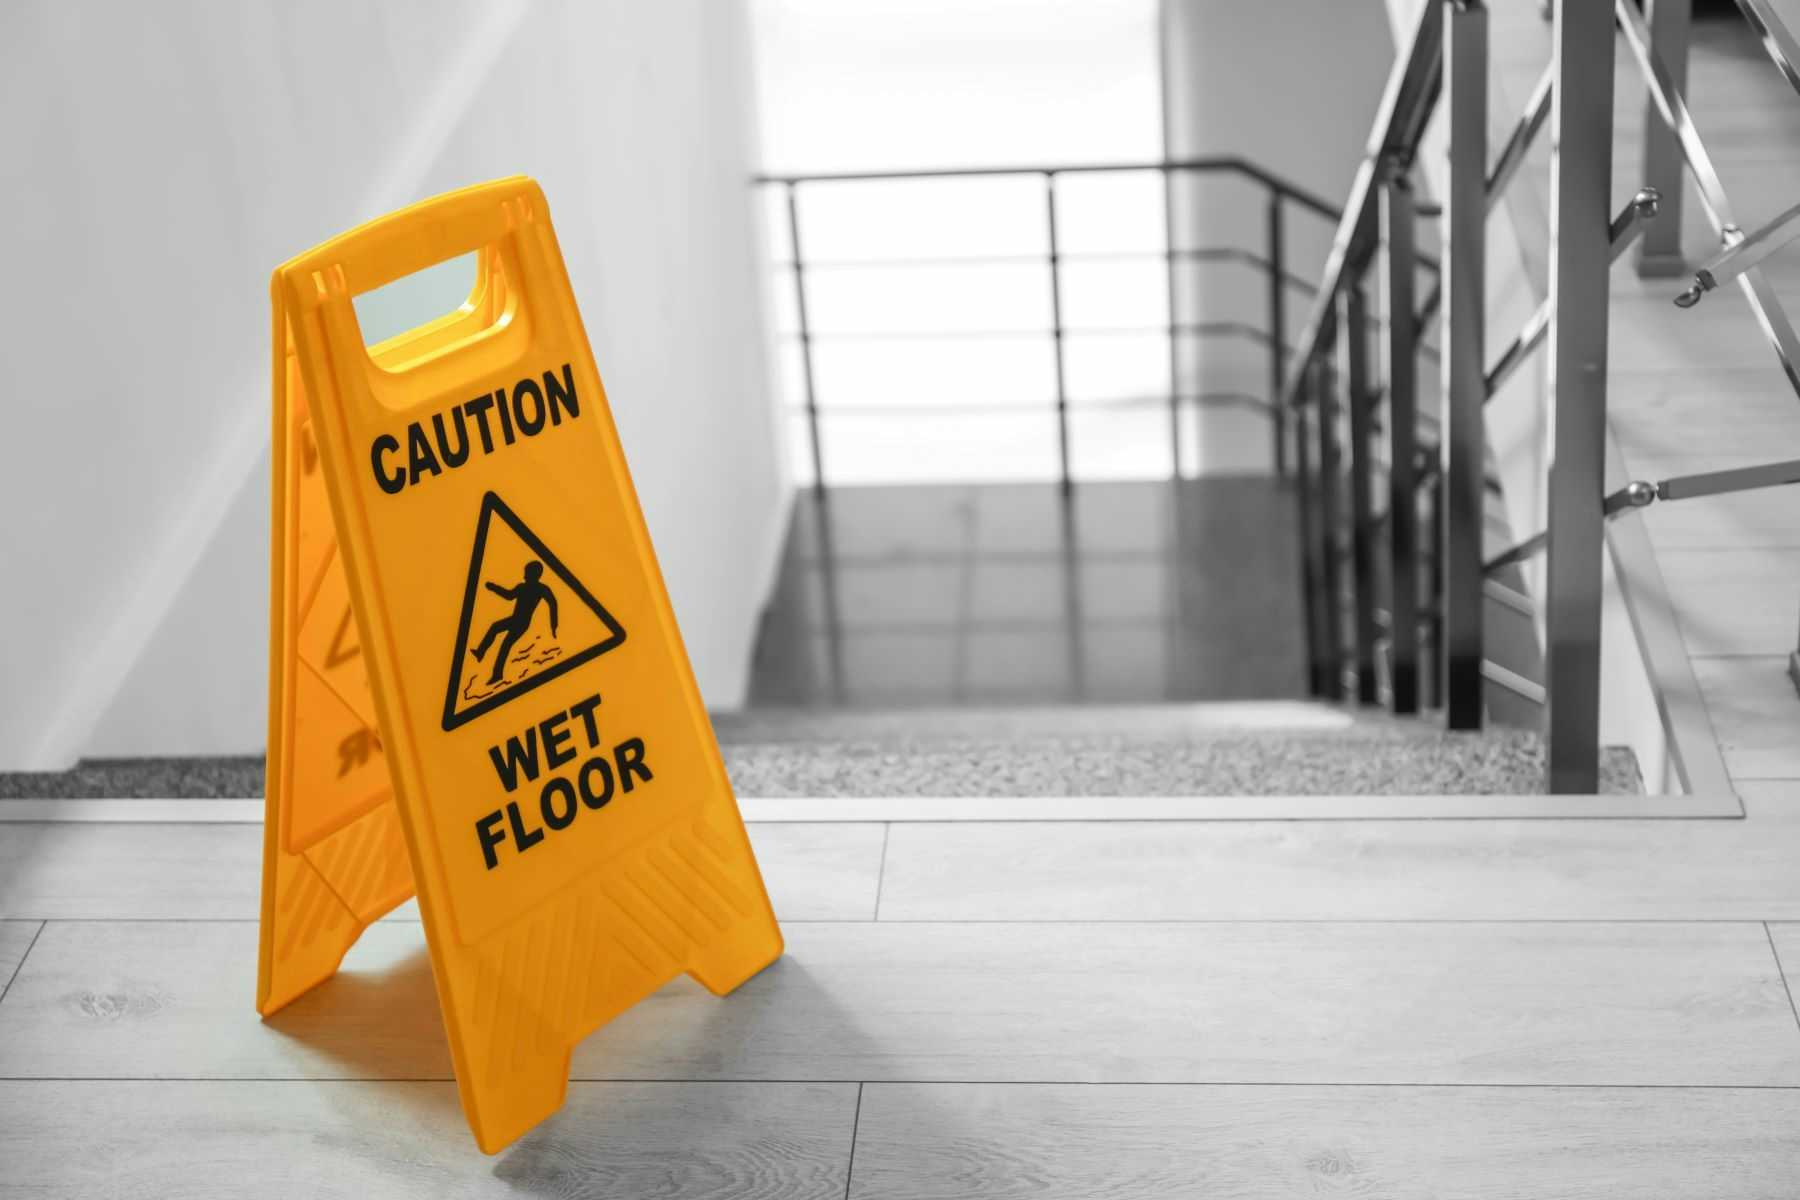 Wet floor sign by stairs